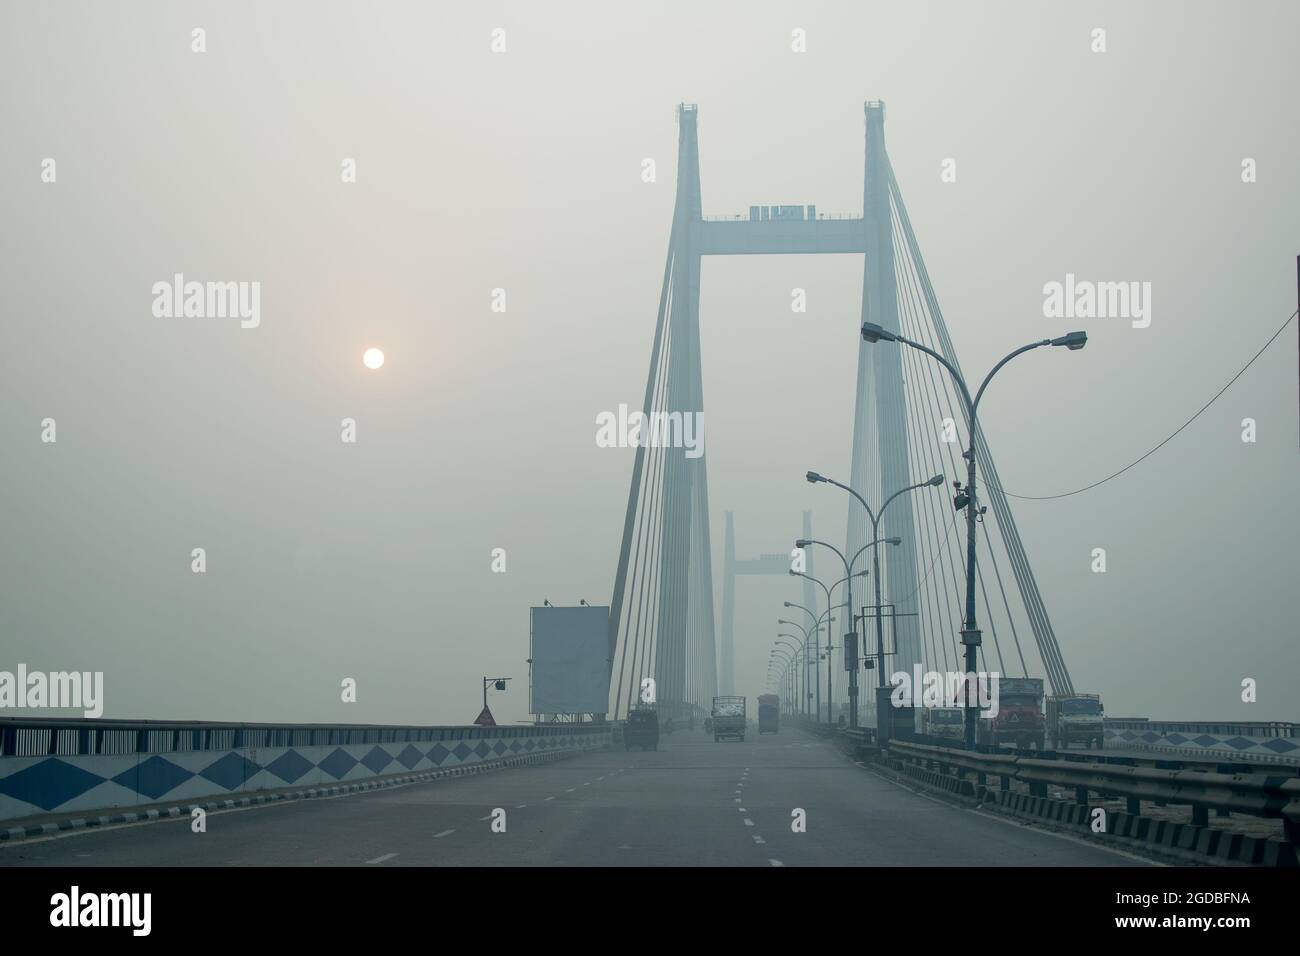 Second Hoogly Bridge, also called Vidyasagar Setu, connects Kolkata and Howrah - two major cities of West Bengal. It is the longest cable-stayed bridg Stock Photo